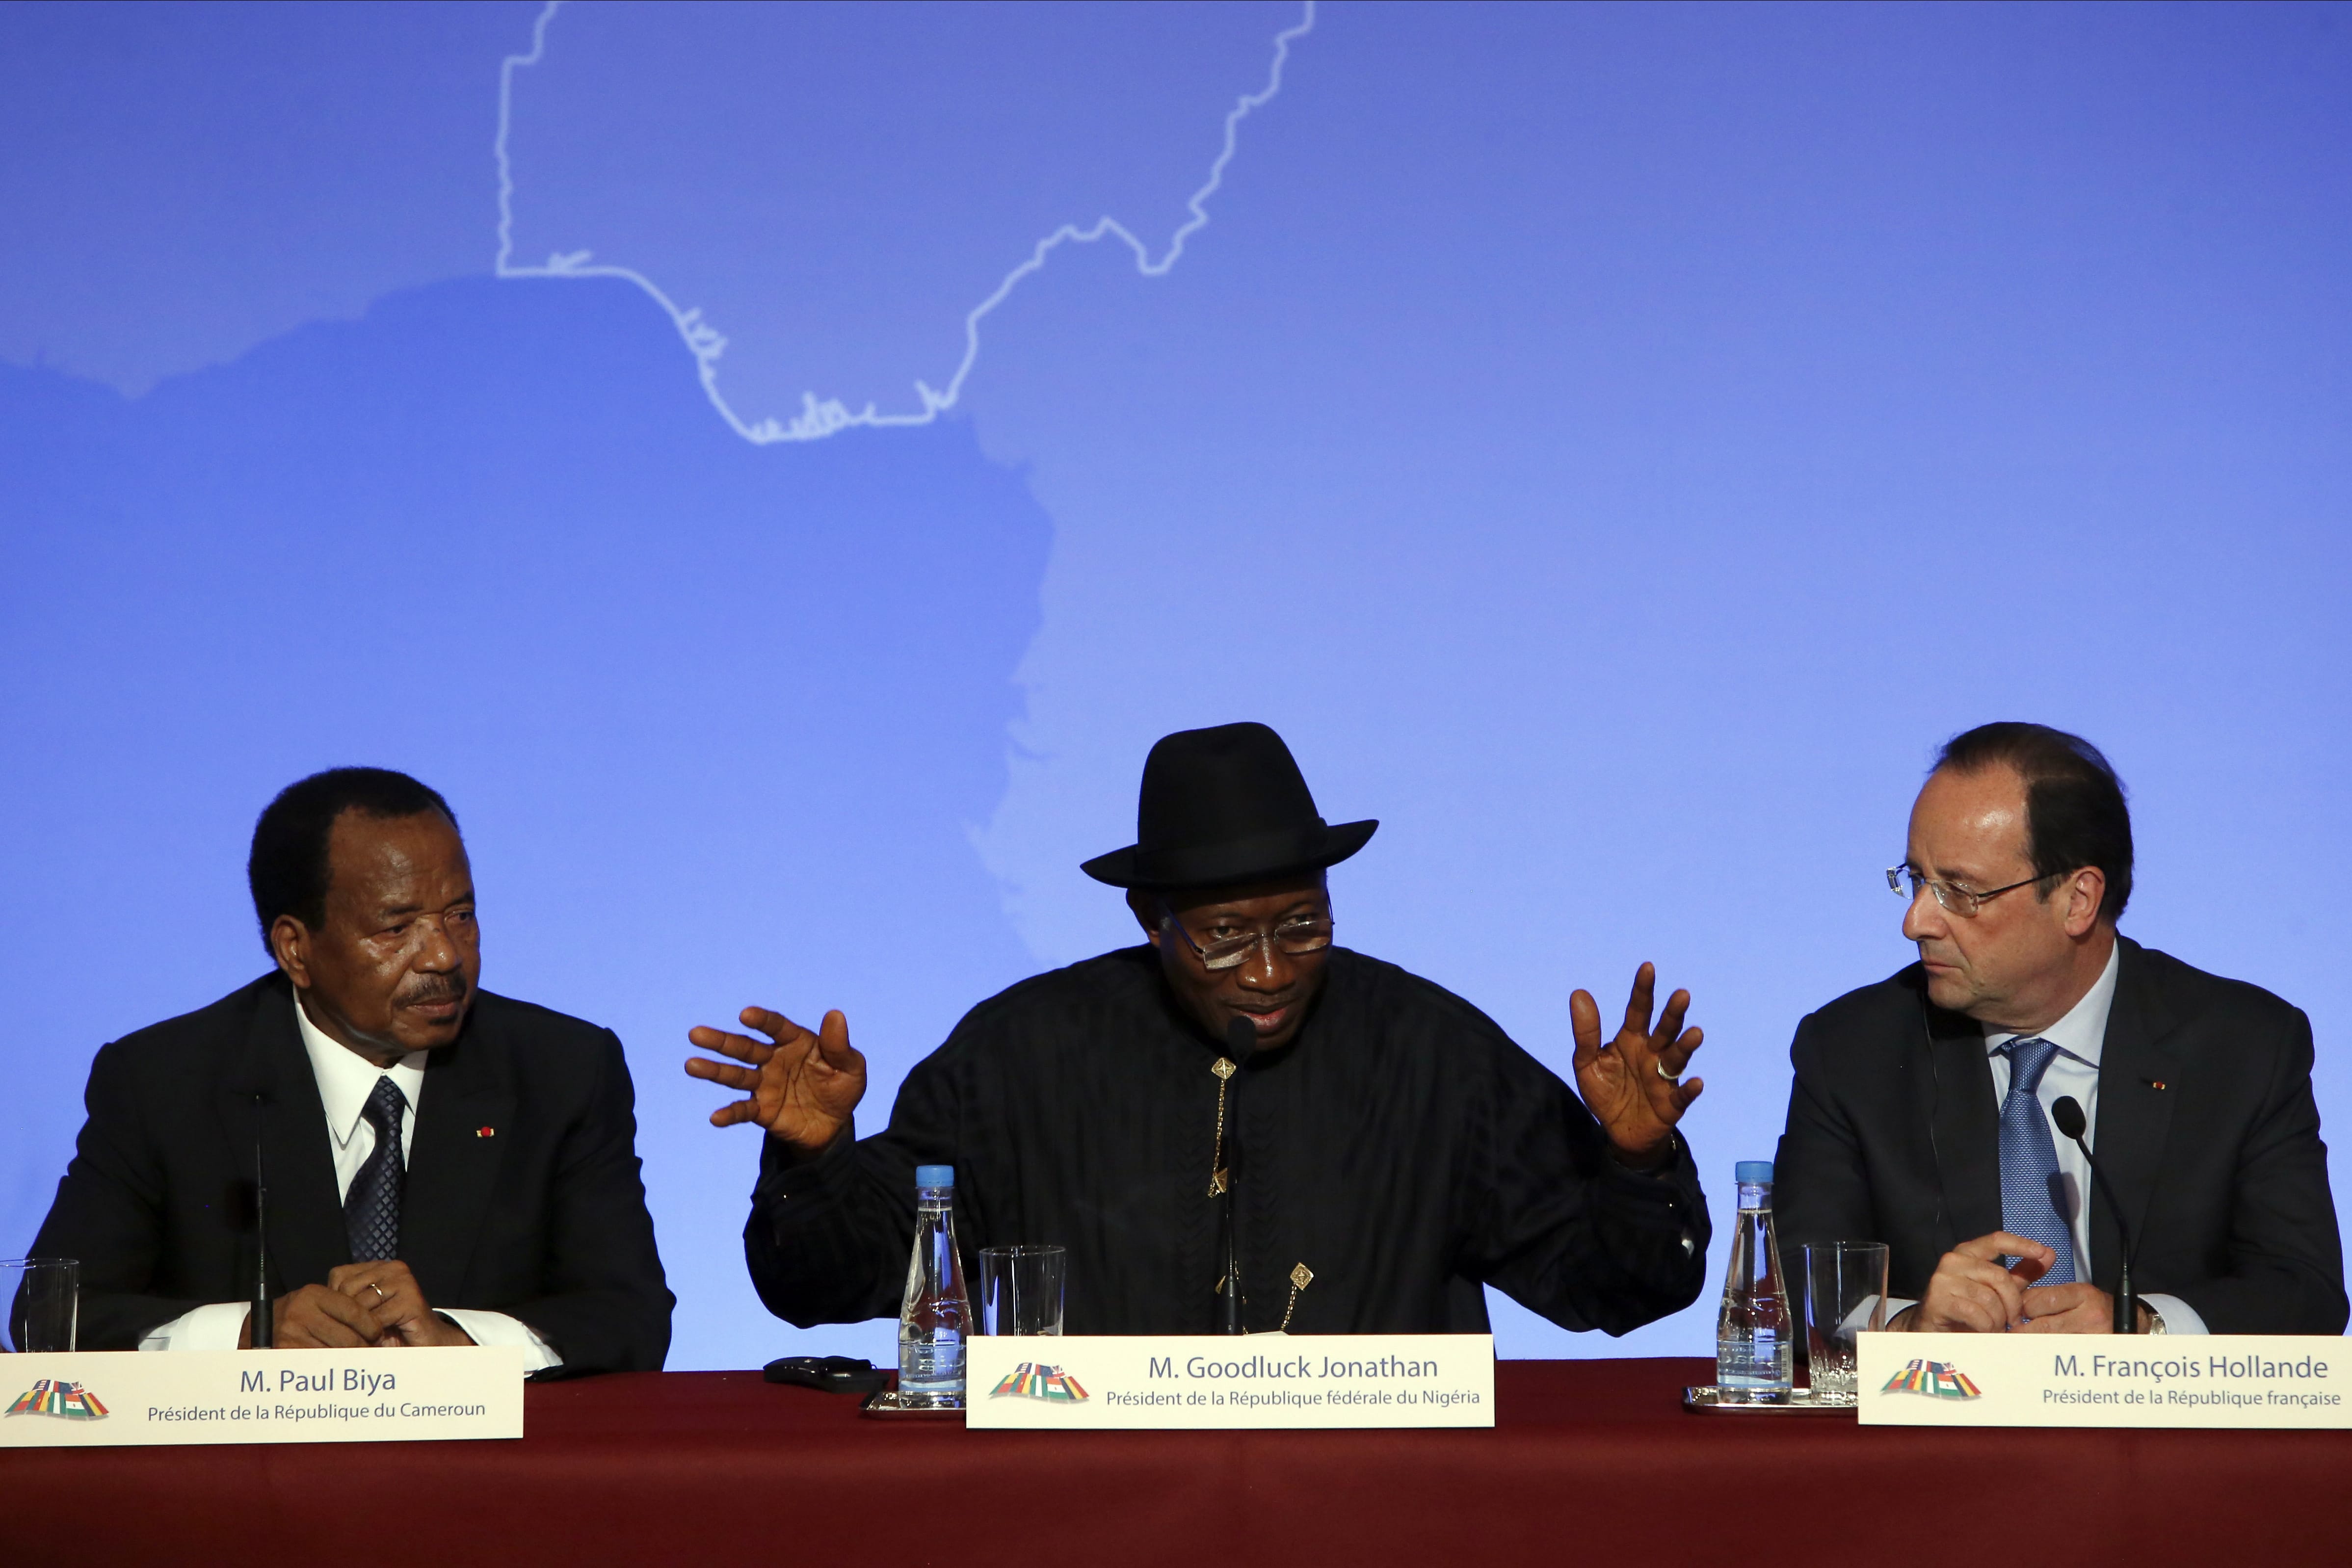 Nigerian President Goodluck Jonathan, center, answers a reporter's questions as Cameroonian  President Paul Biya, left, and French President Francois Hollande look on Saturday during the press conference ending the &quot;Paris Summit for Security in Nigeria,&quot; at the Elysee Palace in Paris. Leaders from Africa as well as officials from the United States, Britain and France met to coordinate a response to Boko Haram, the fundamentalist group that abducted more than 300 girls and is accused of hundreds of deaths in the past year alone.